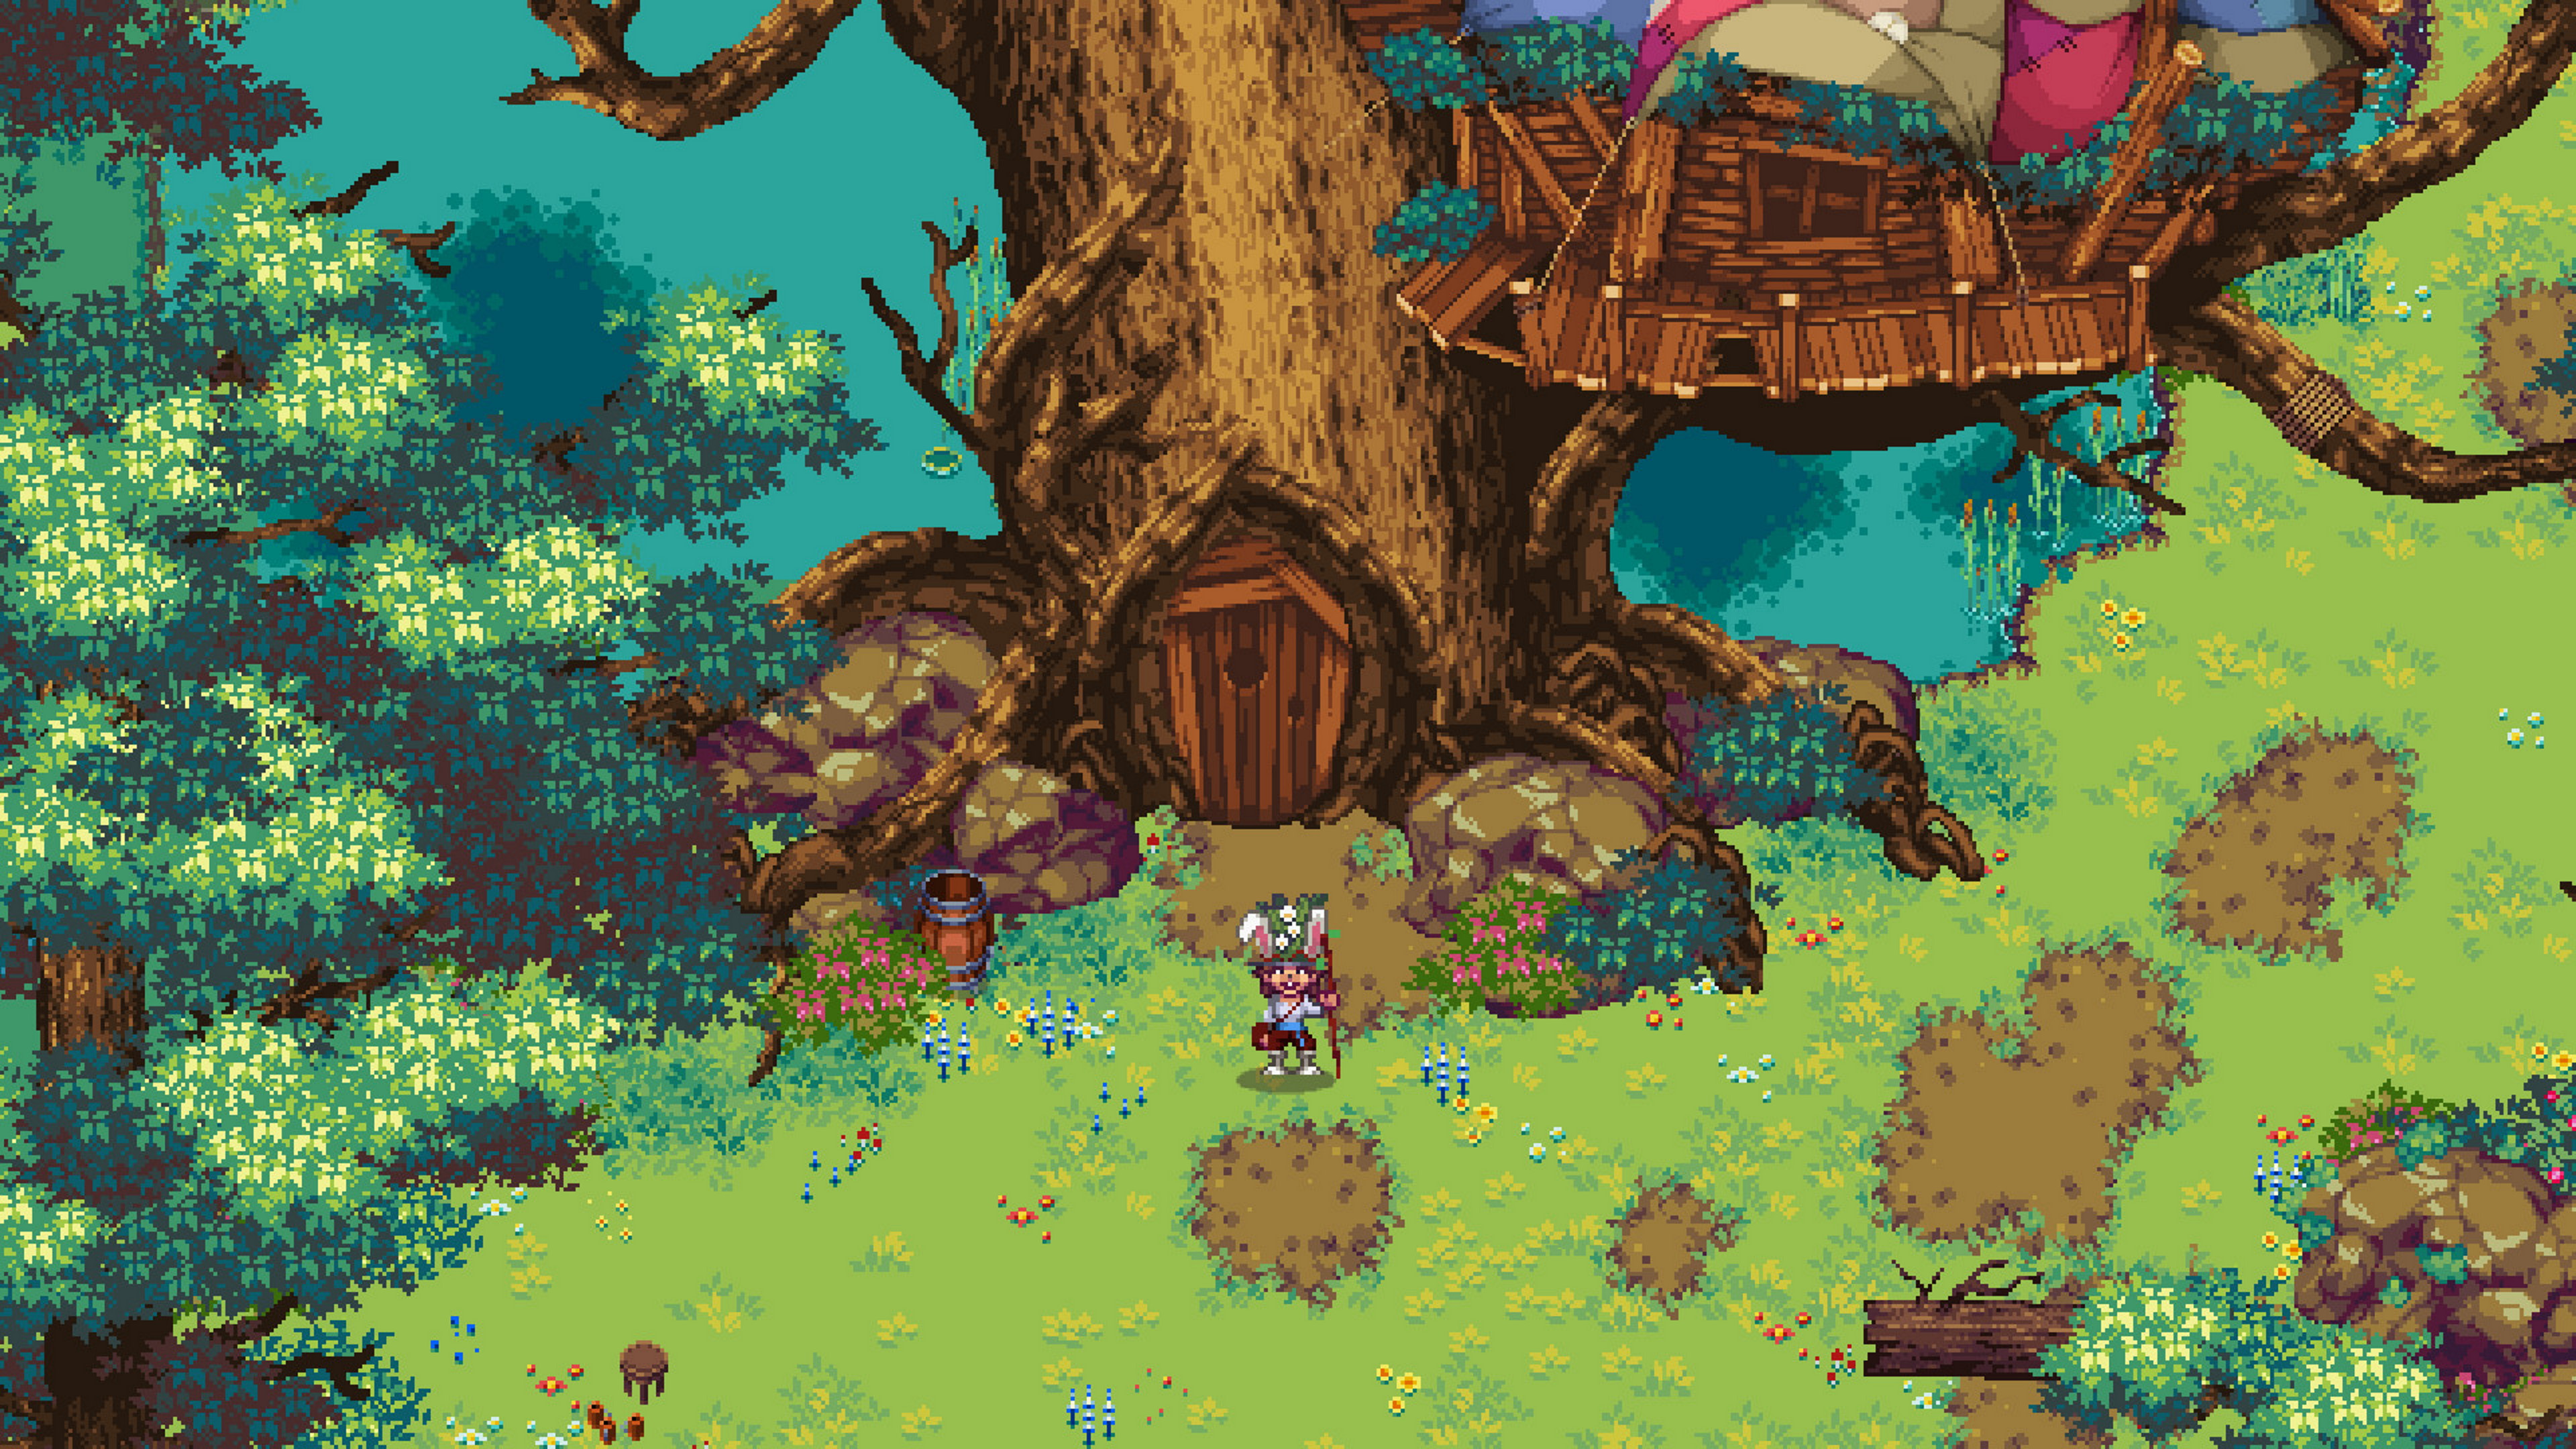 Kynseed - A player stands in front of a large treehouse in the woods